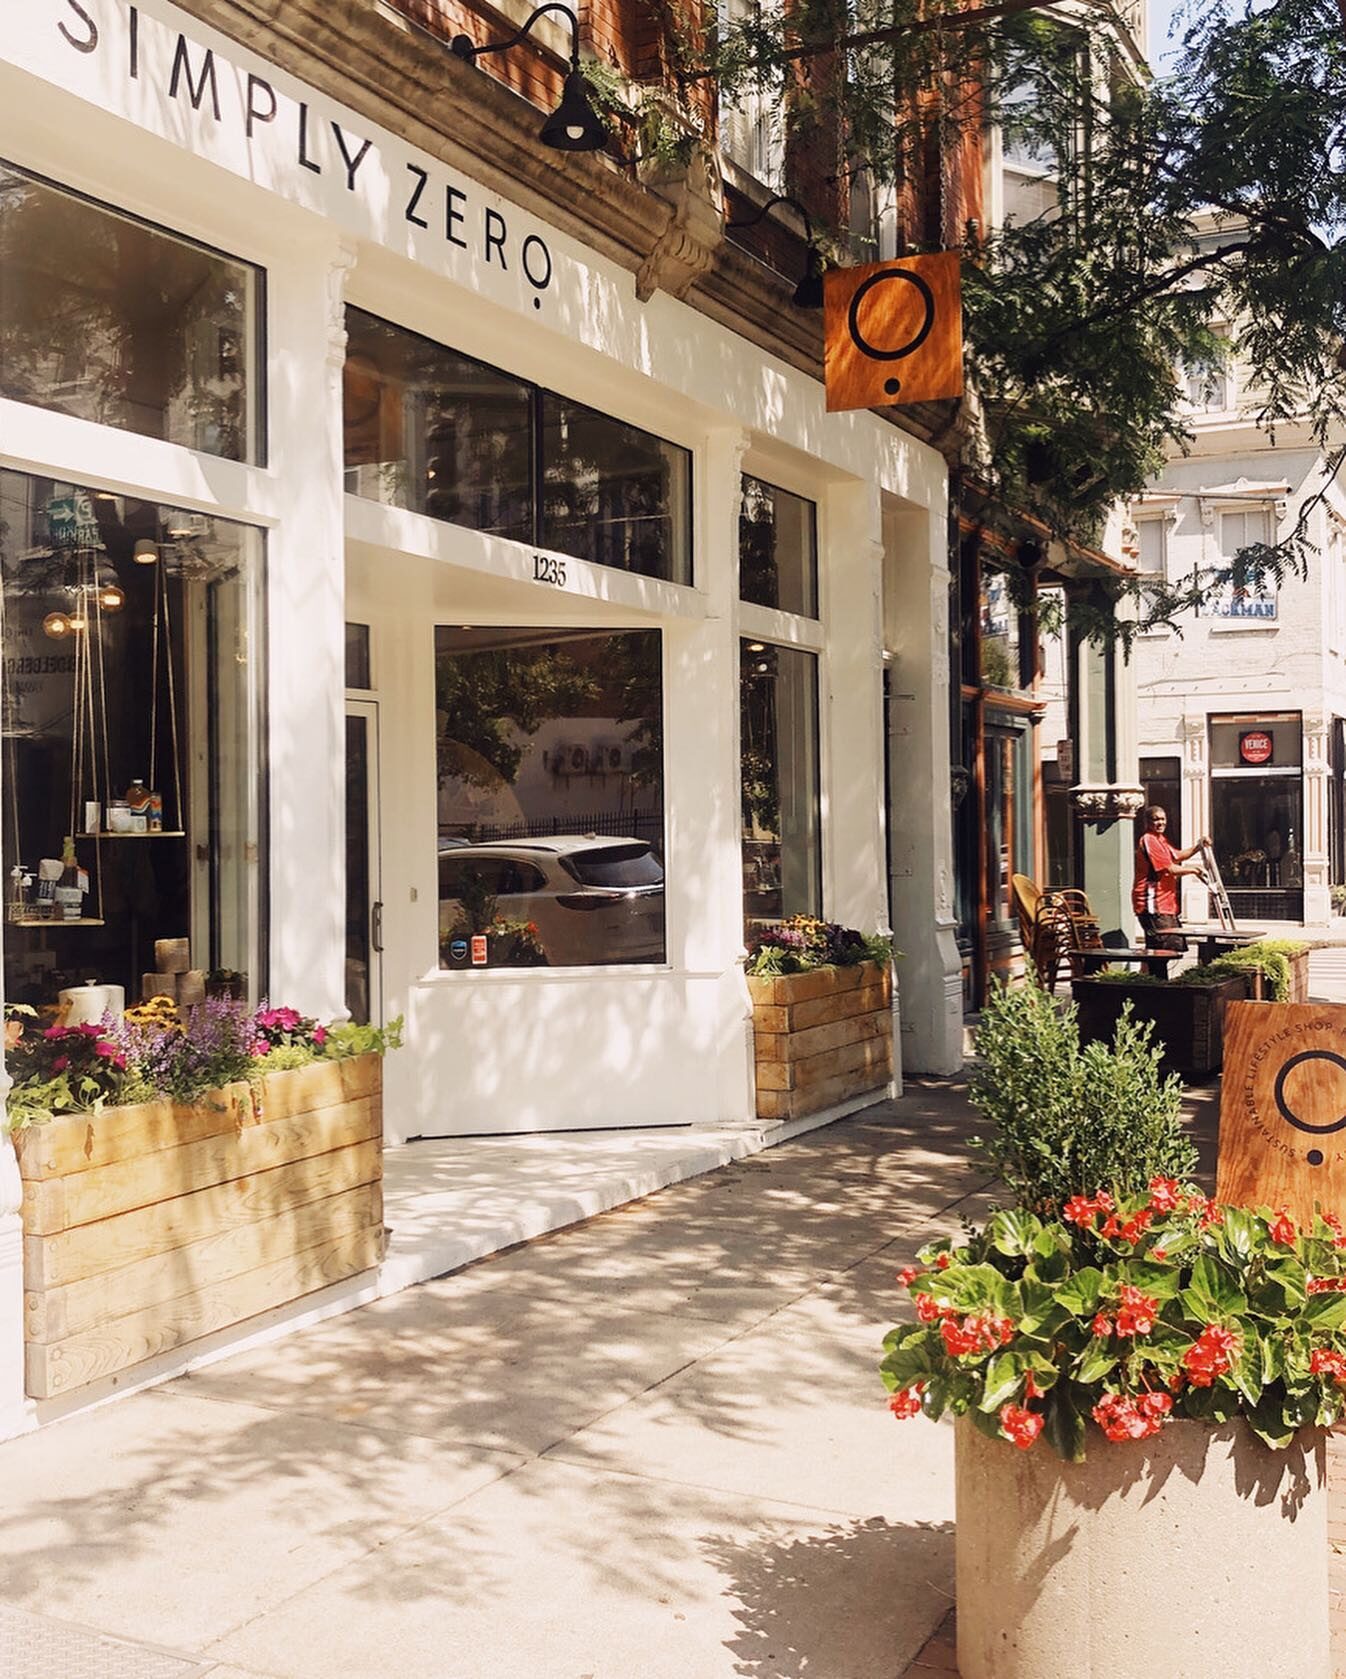 Storefront of Simply Zero along the Lewis and Clark Historic Trail